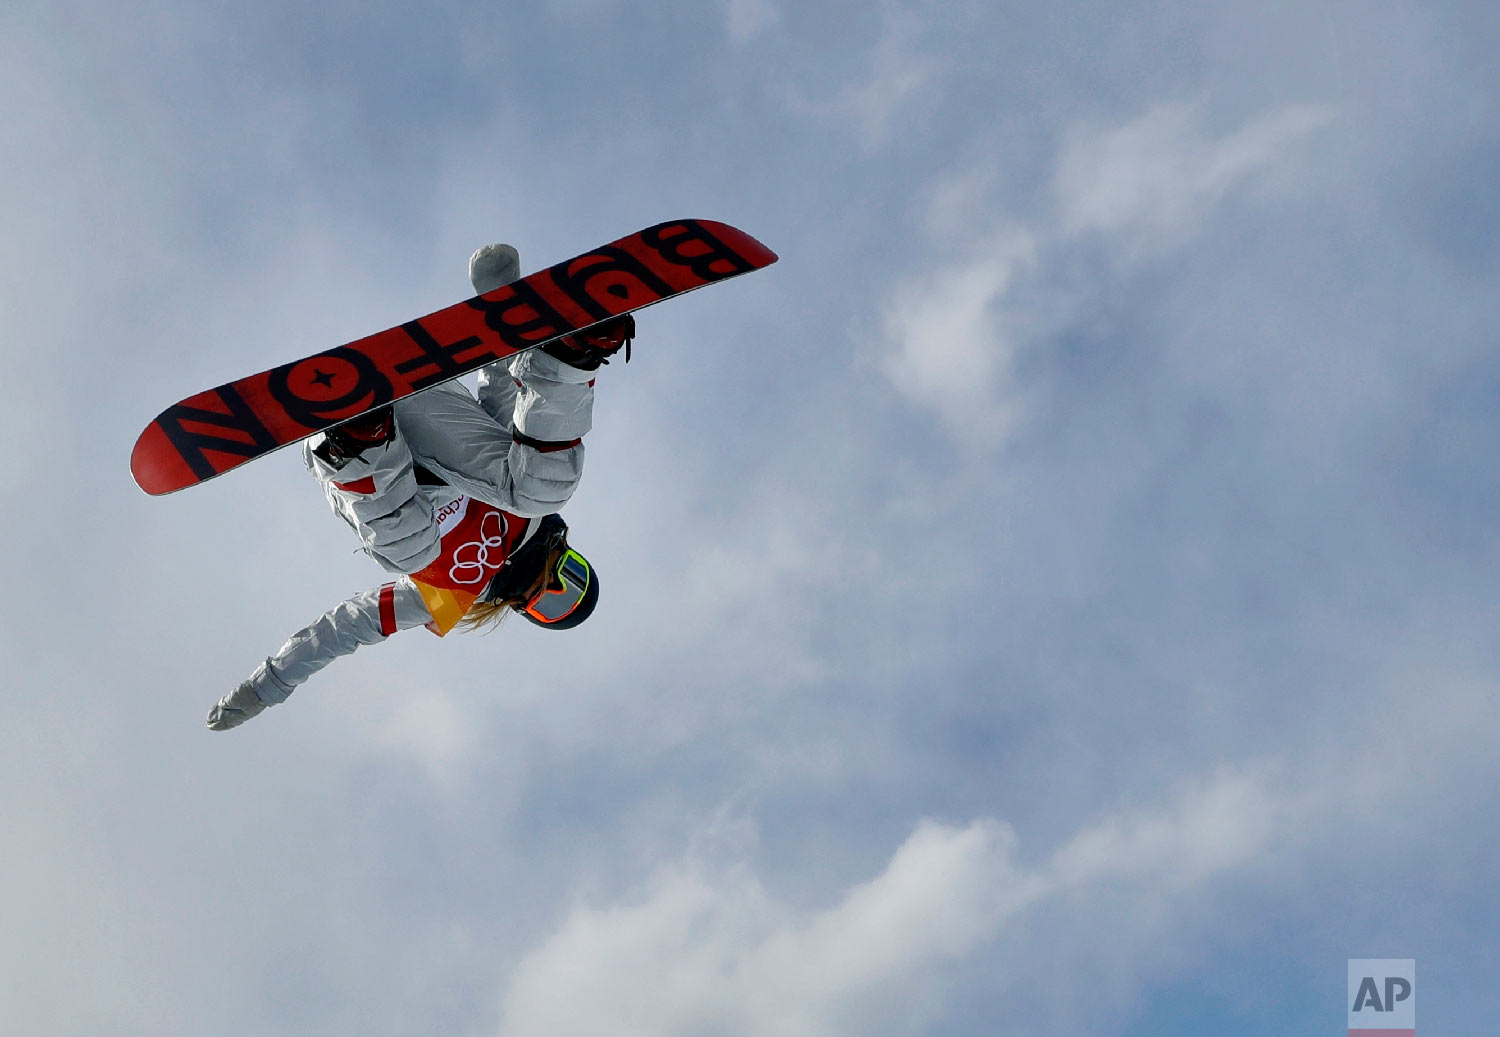  Chloe Kim, of the United States, jumps during the women's halfpipe qualifying at Phoenix Snow Park at the 2018 Winter Olympics in Pyeongchang, South Korea, Monday, Feb. 12, 2018. (AP Photo/Kin Cheung) 